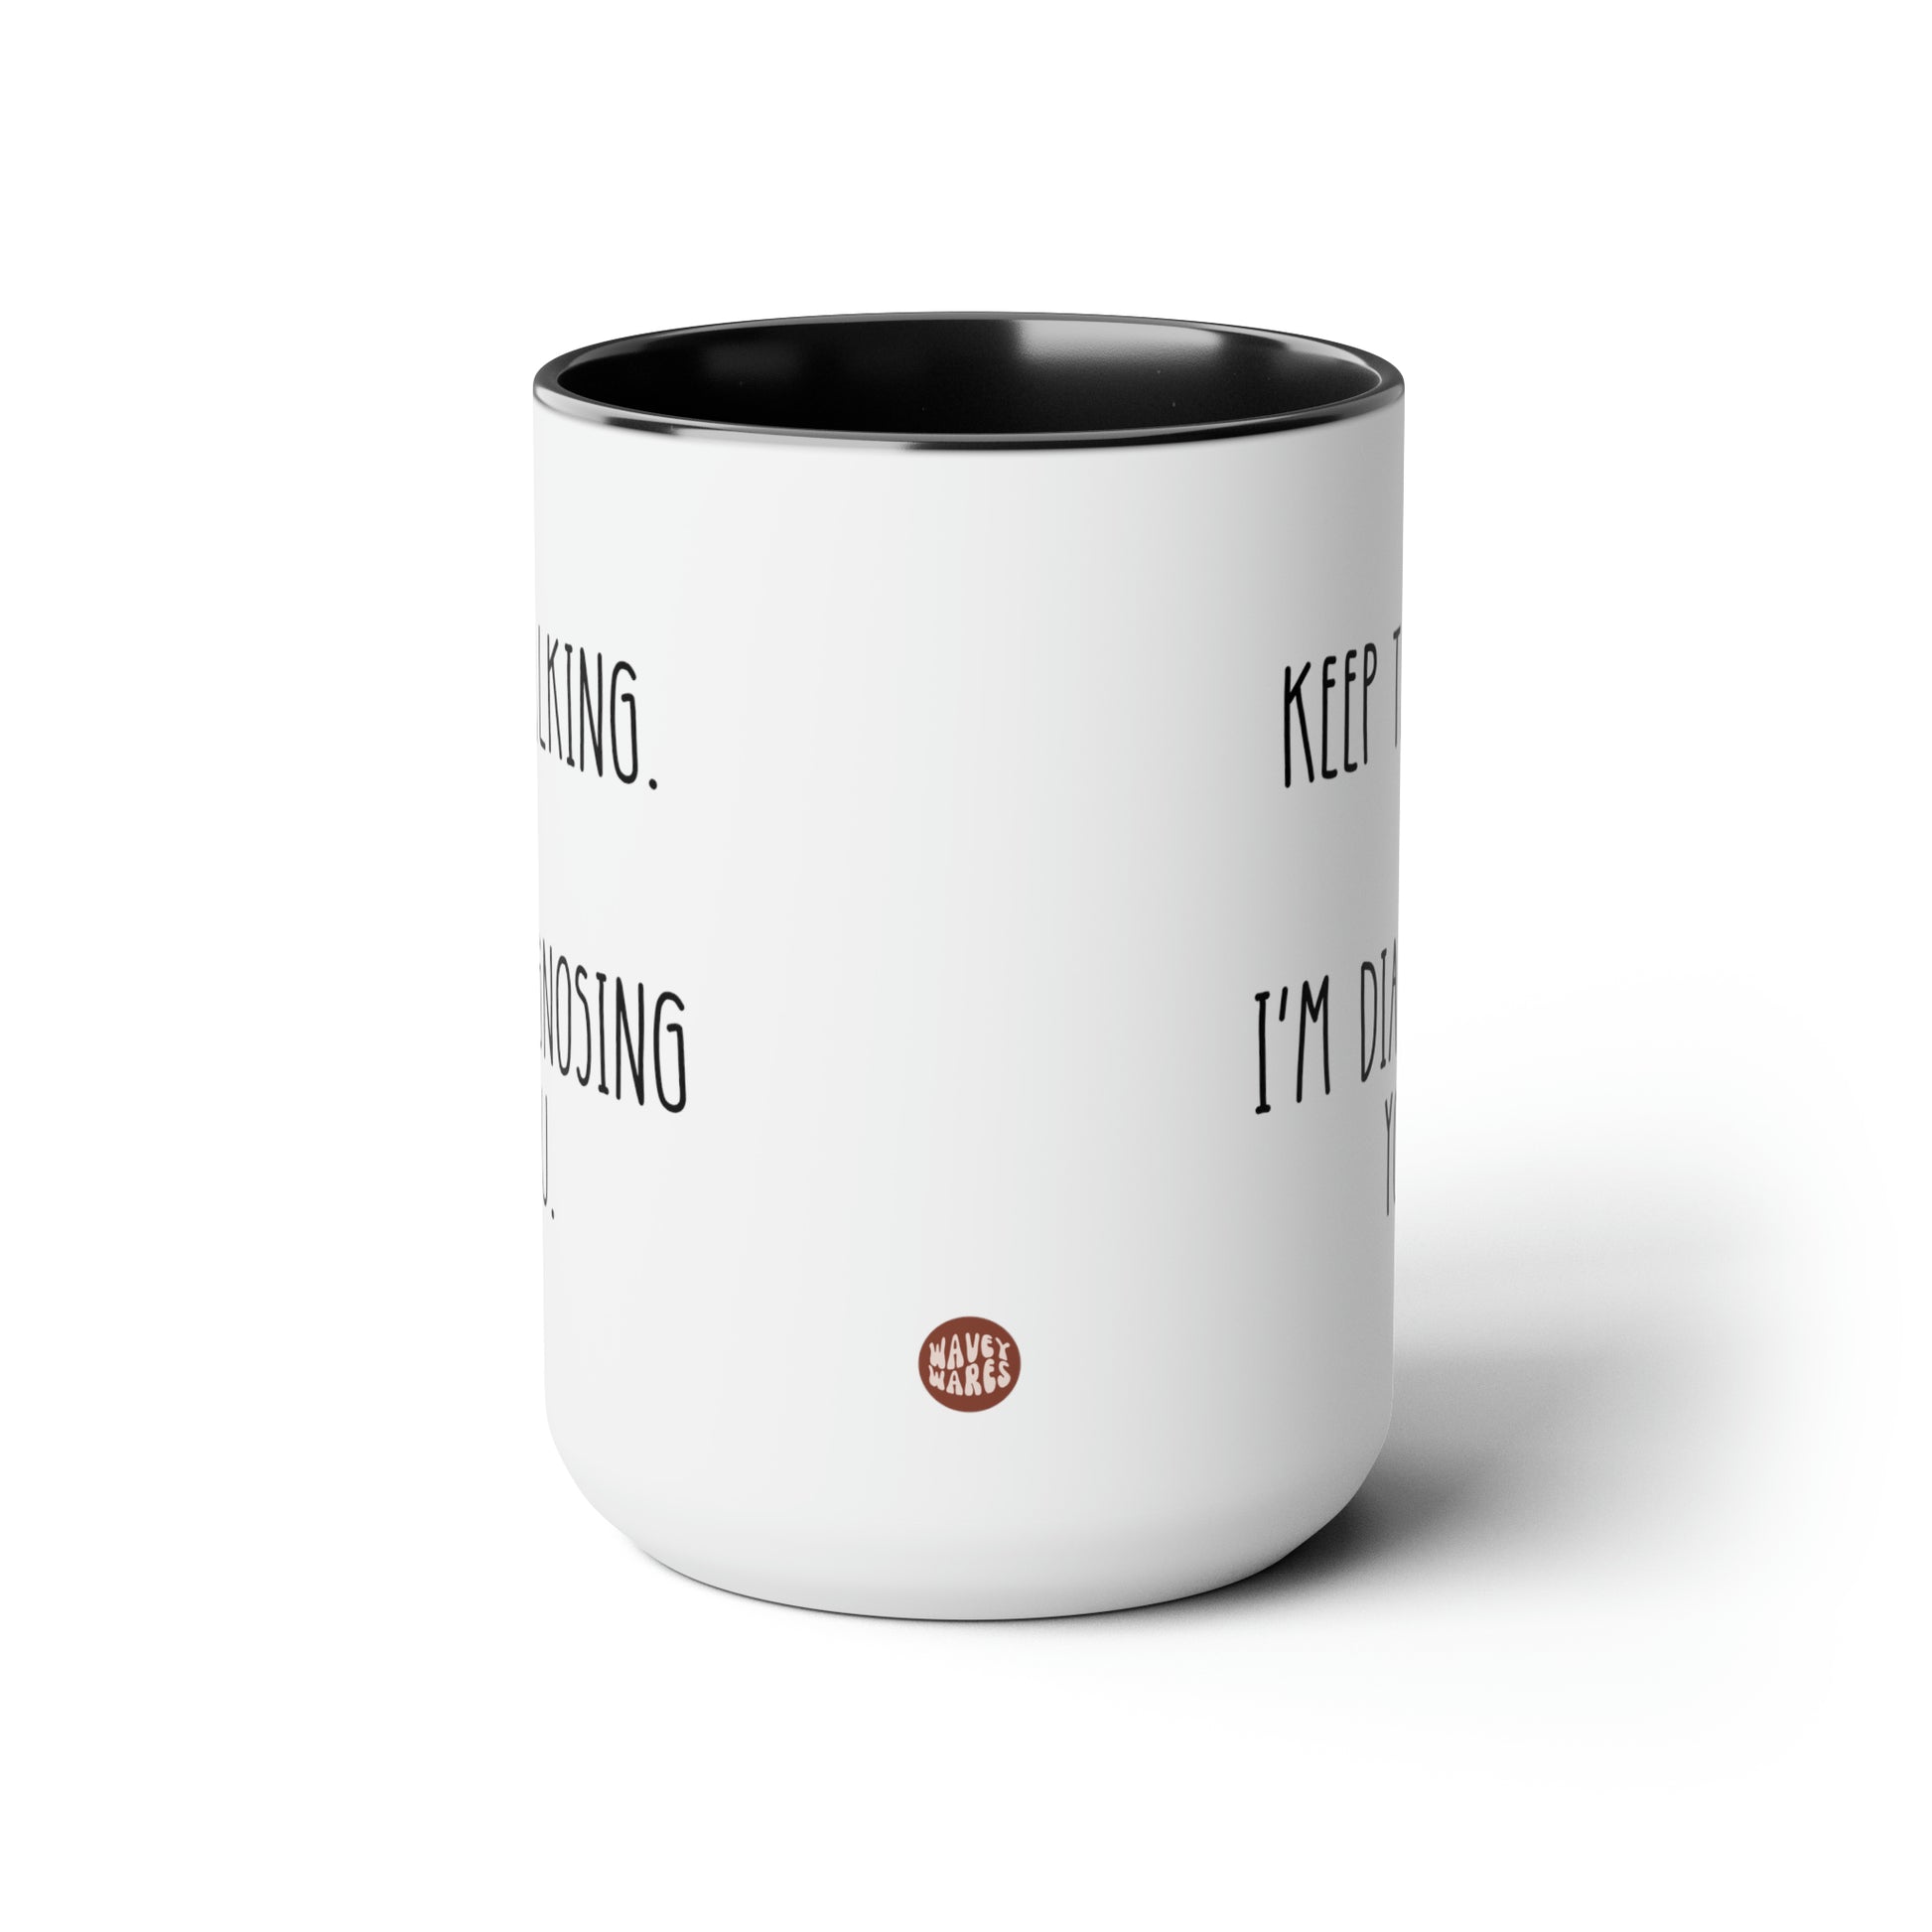 Keep Talking Im Diagnosing You 15oz white with black accent Funny large Coffee Mug Psychology Gift for Psychiatrist Therapist Counselor waveywares wavey wares wavywares wavy wares side